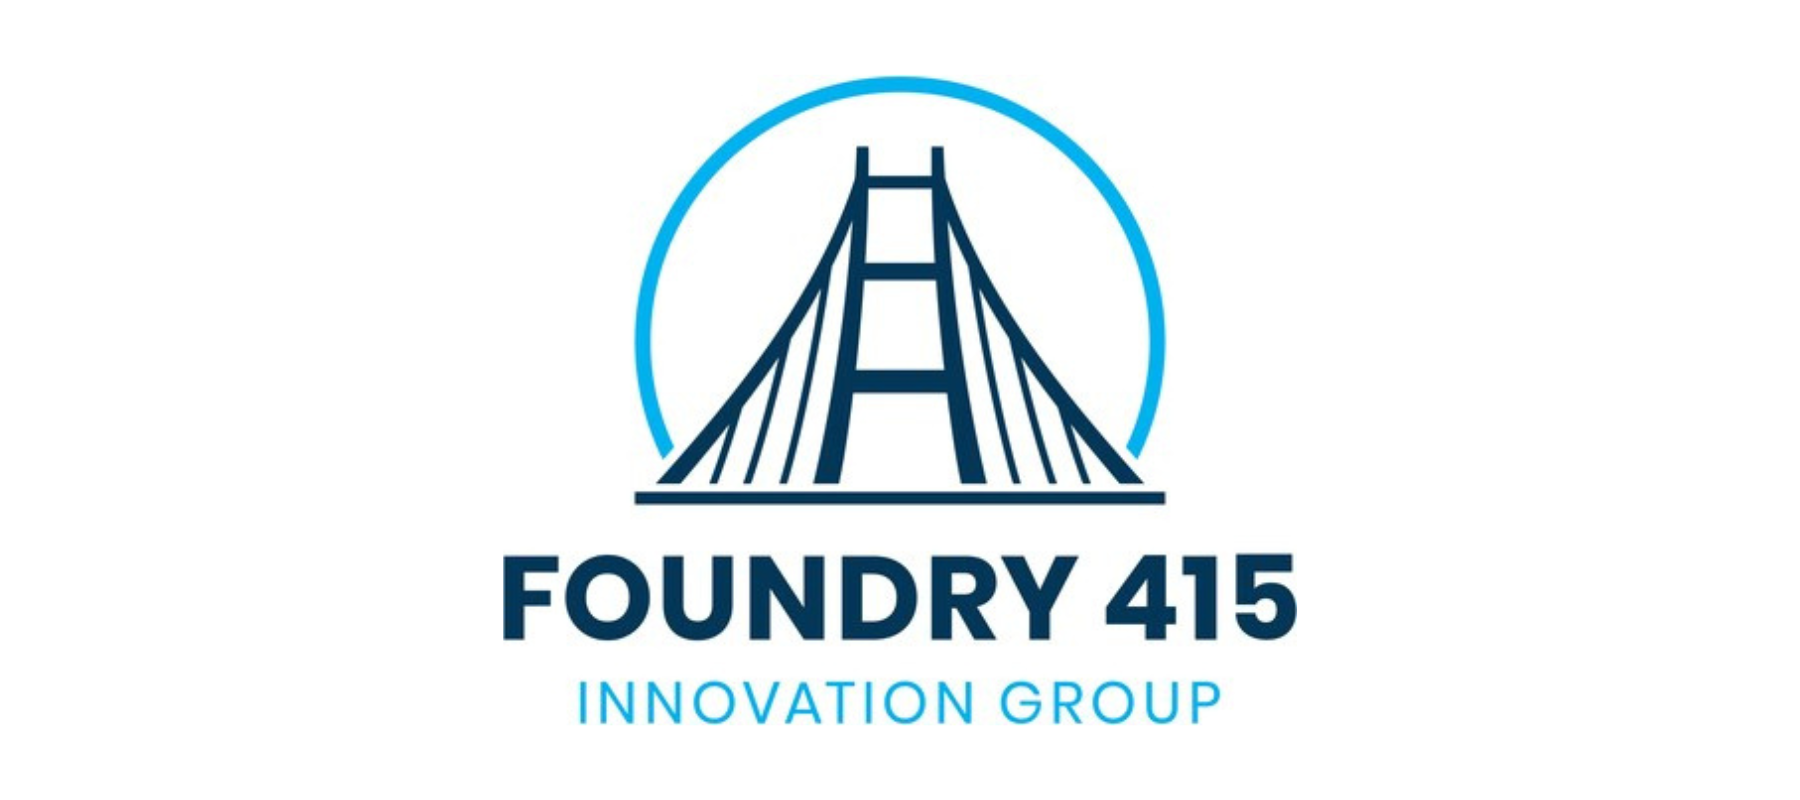 Foundry 415 Innovation Group launches Startup BoostCamp workshop series to accelerate startup growth and success